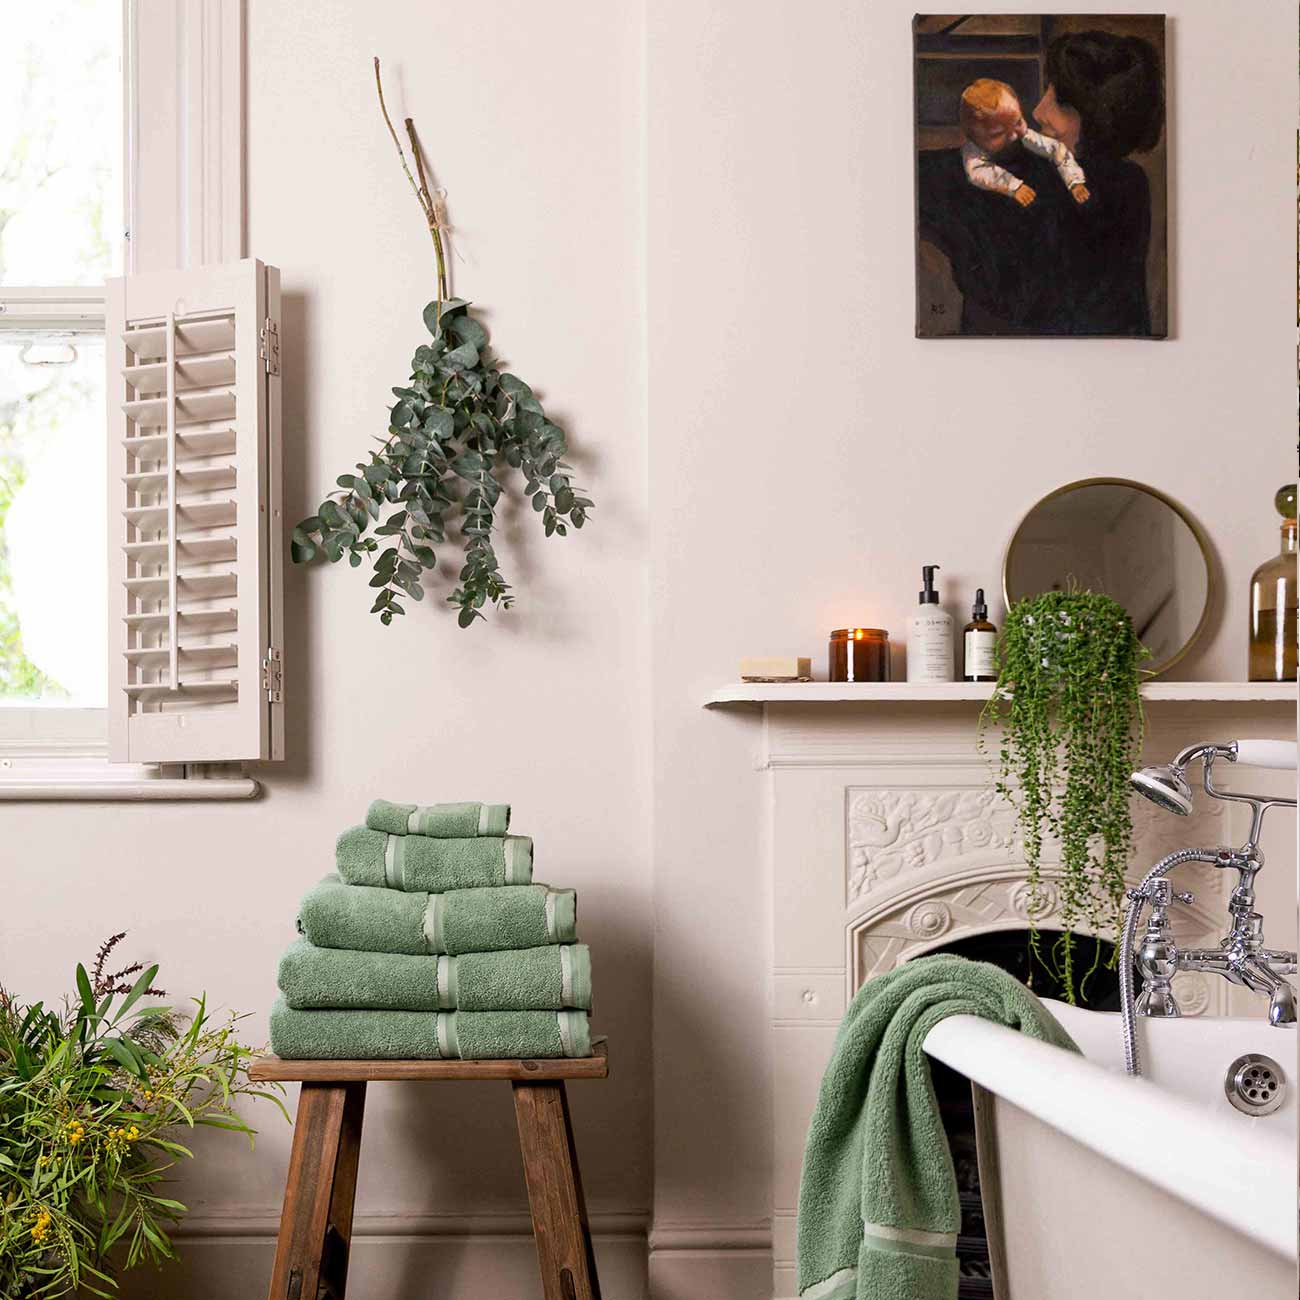 Meadow Green Cotton Towels